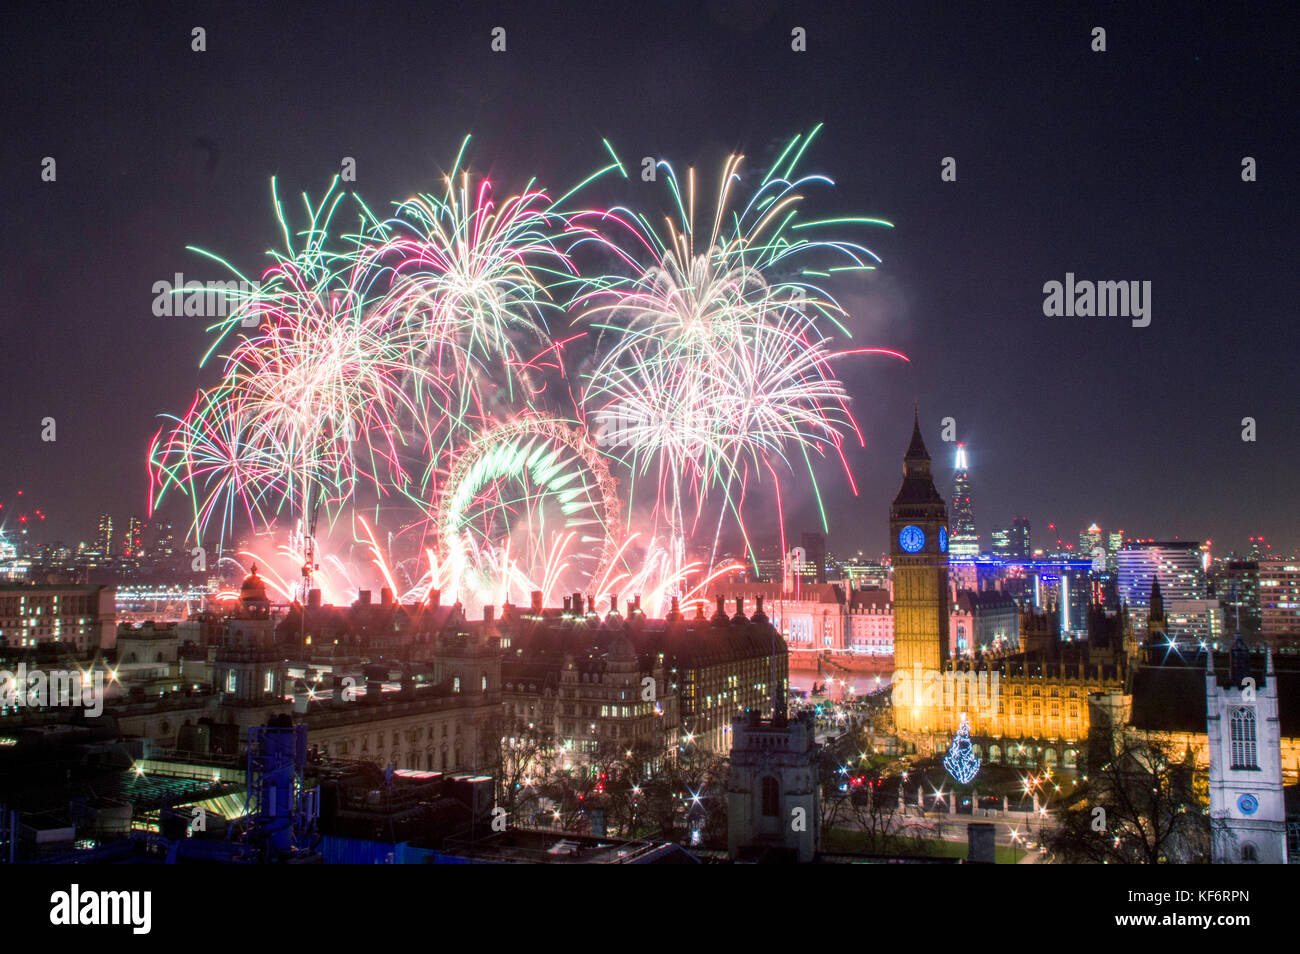 The mayor of londons New Year Fireworks display Stock Photo